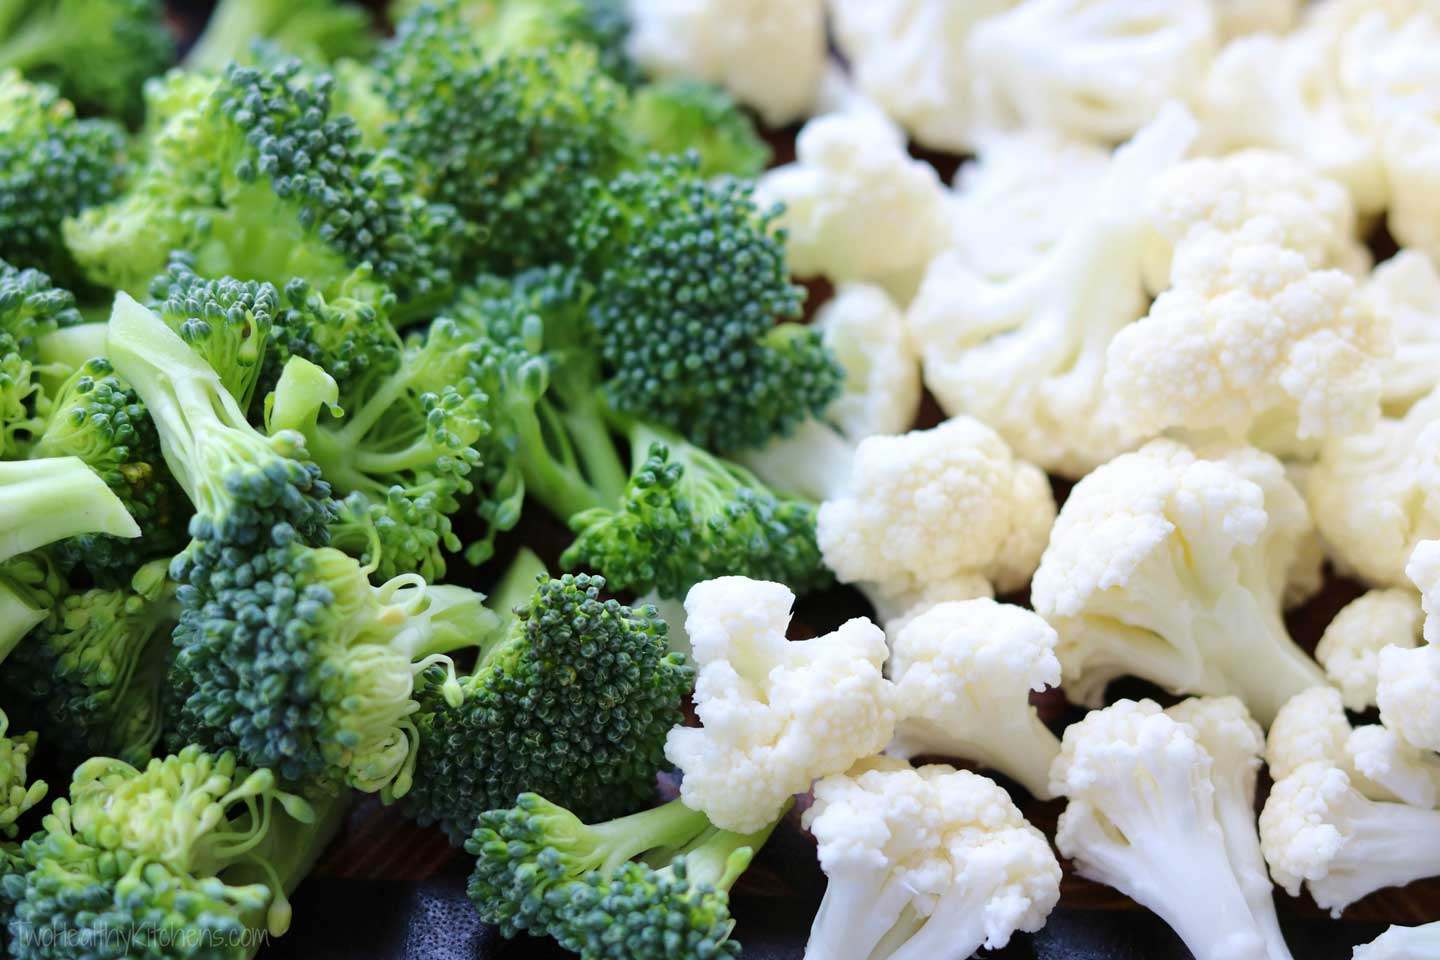 closeup of uncooked veggies - broccoli florets on the left and cauliflower florets on the right